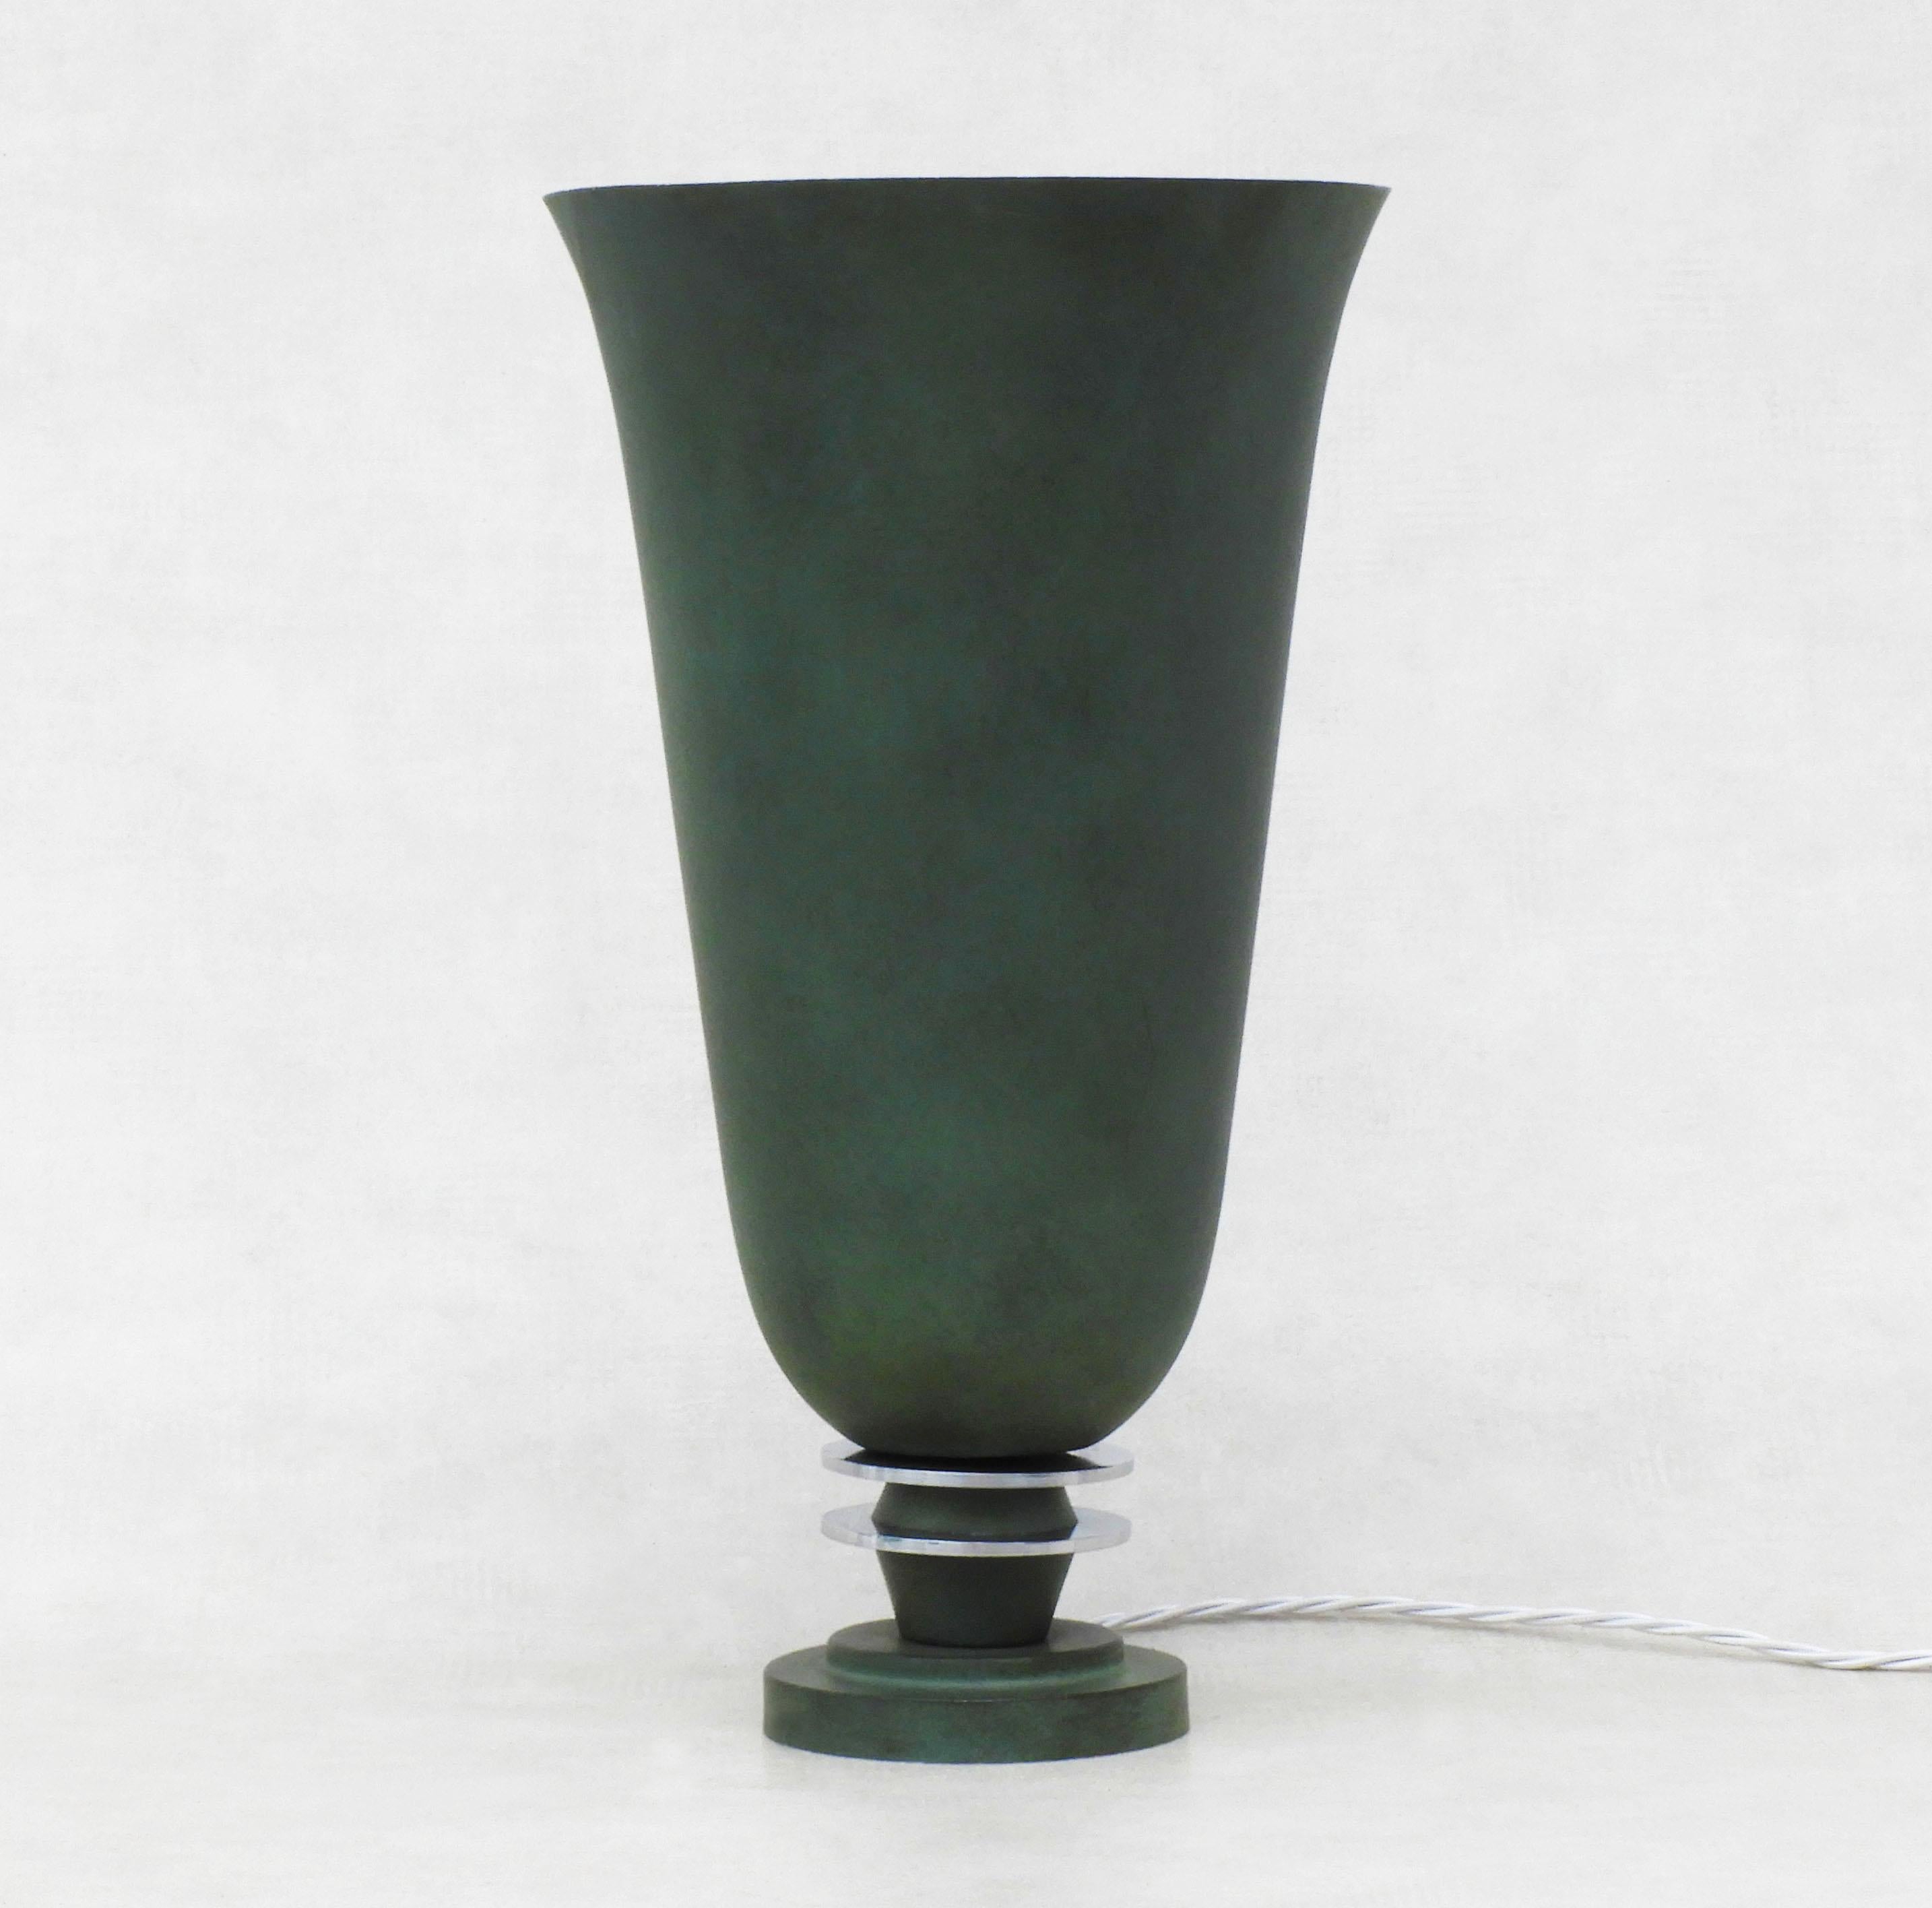 Art Deco uplighter urn lamp from 1930s France.

Striking dark green bell-shaped tabletop lamp with chrome ring detailing, which gives off an attractive, glare-free, indirect light.

In good vintage condition, some grazing to the painted